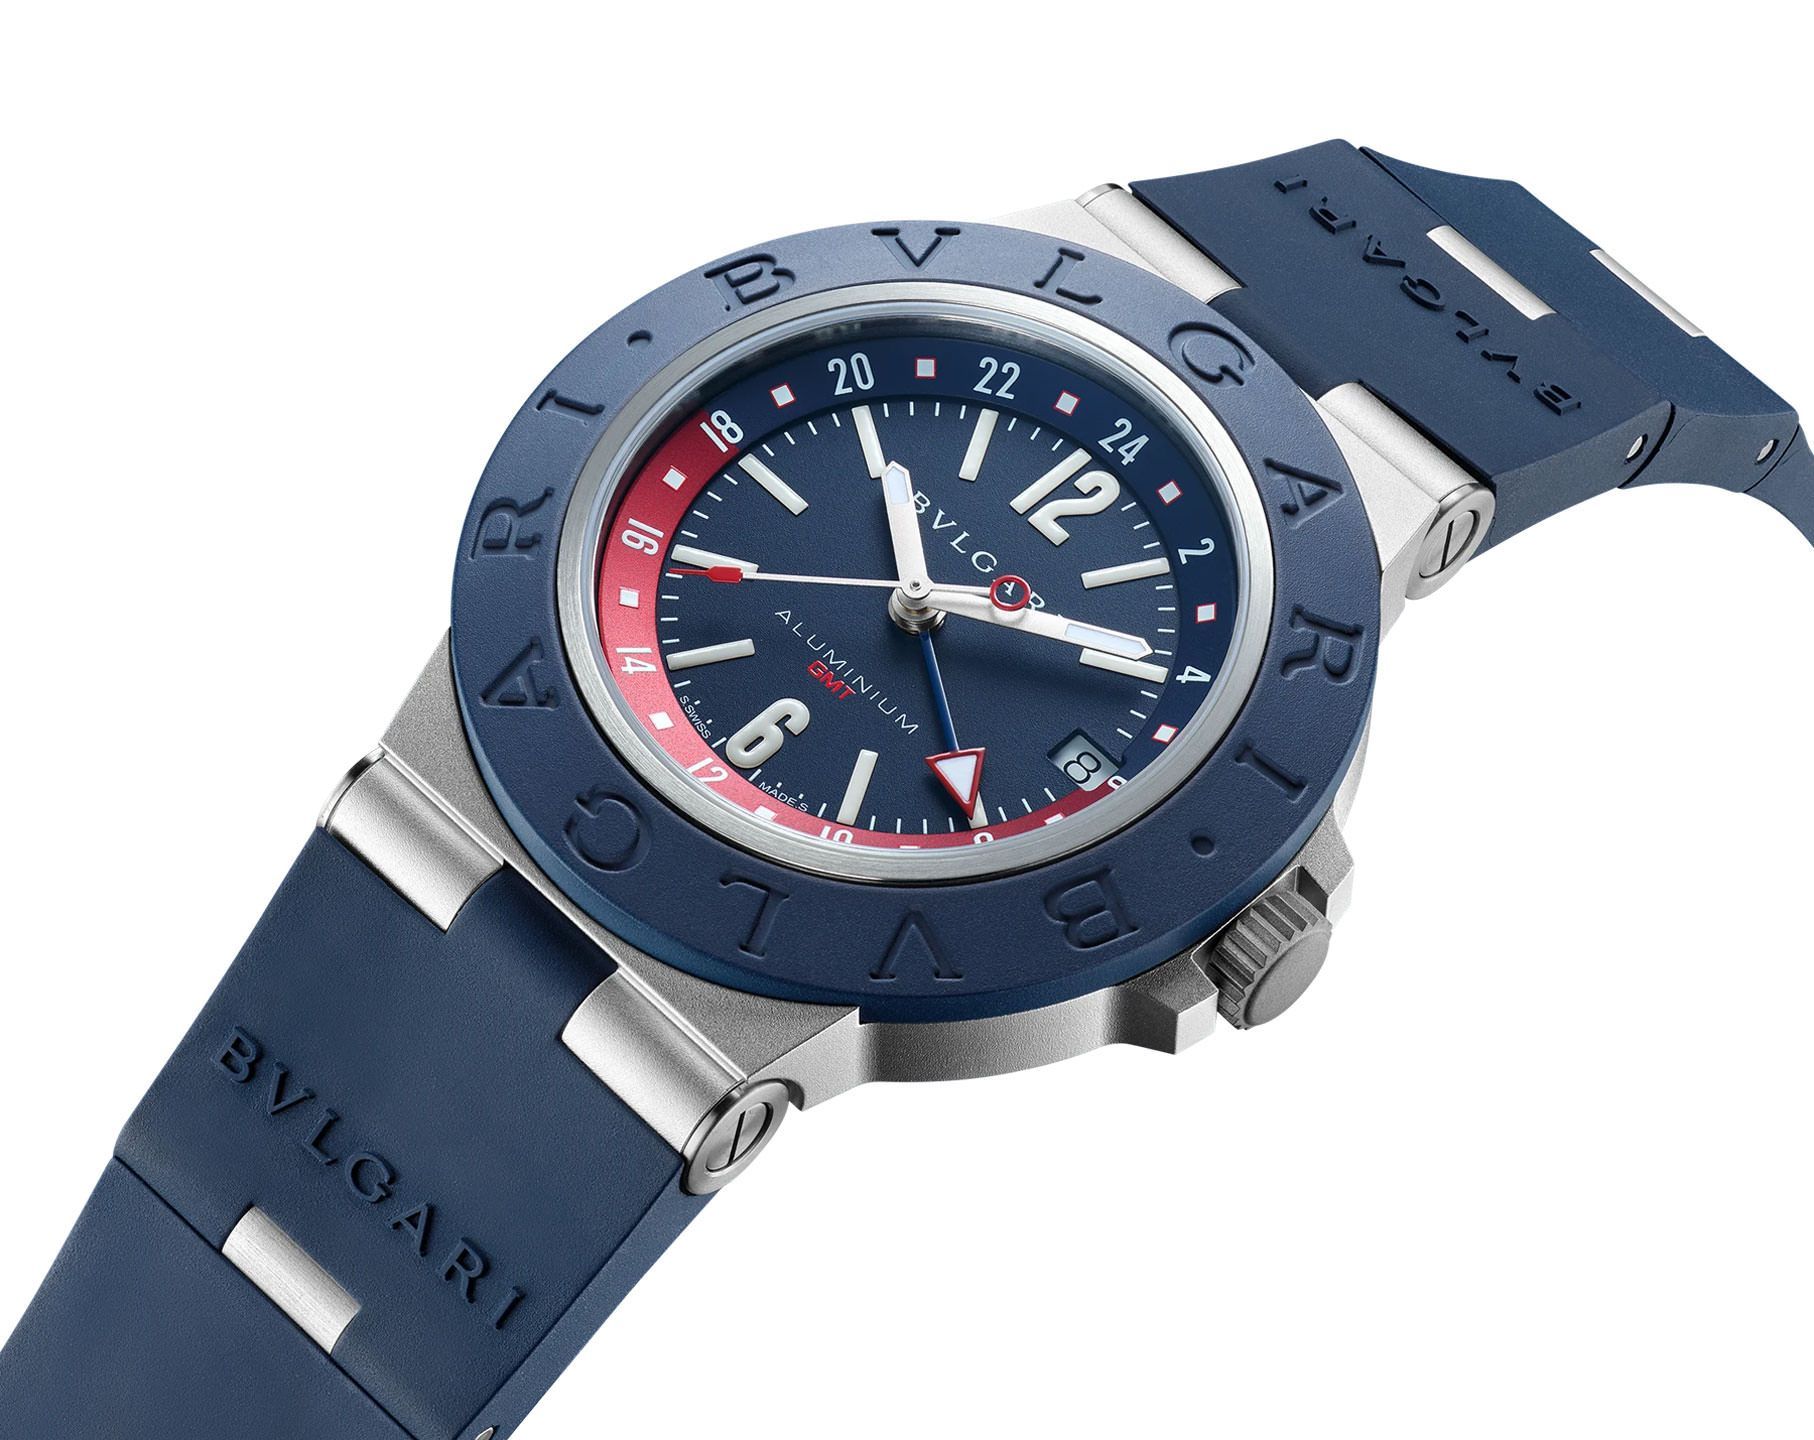 BVLGARI  40 mm Watch in Blue Dial For Men - 2